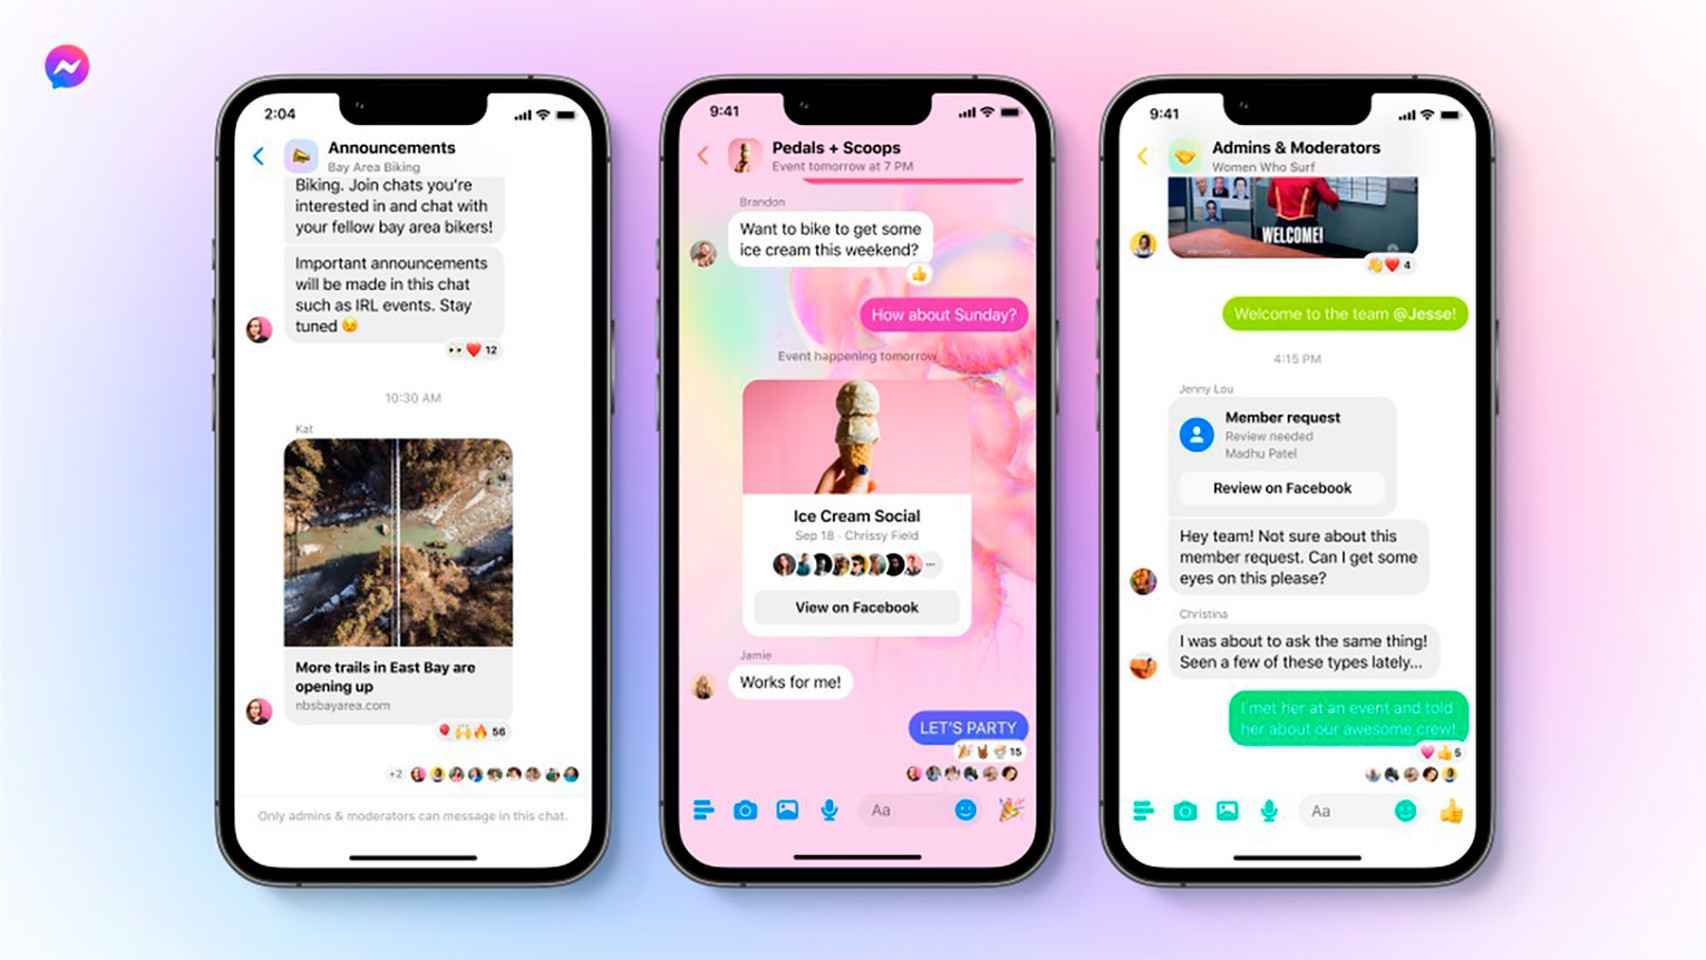 Messenger will be integrated into the Facebook application